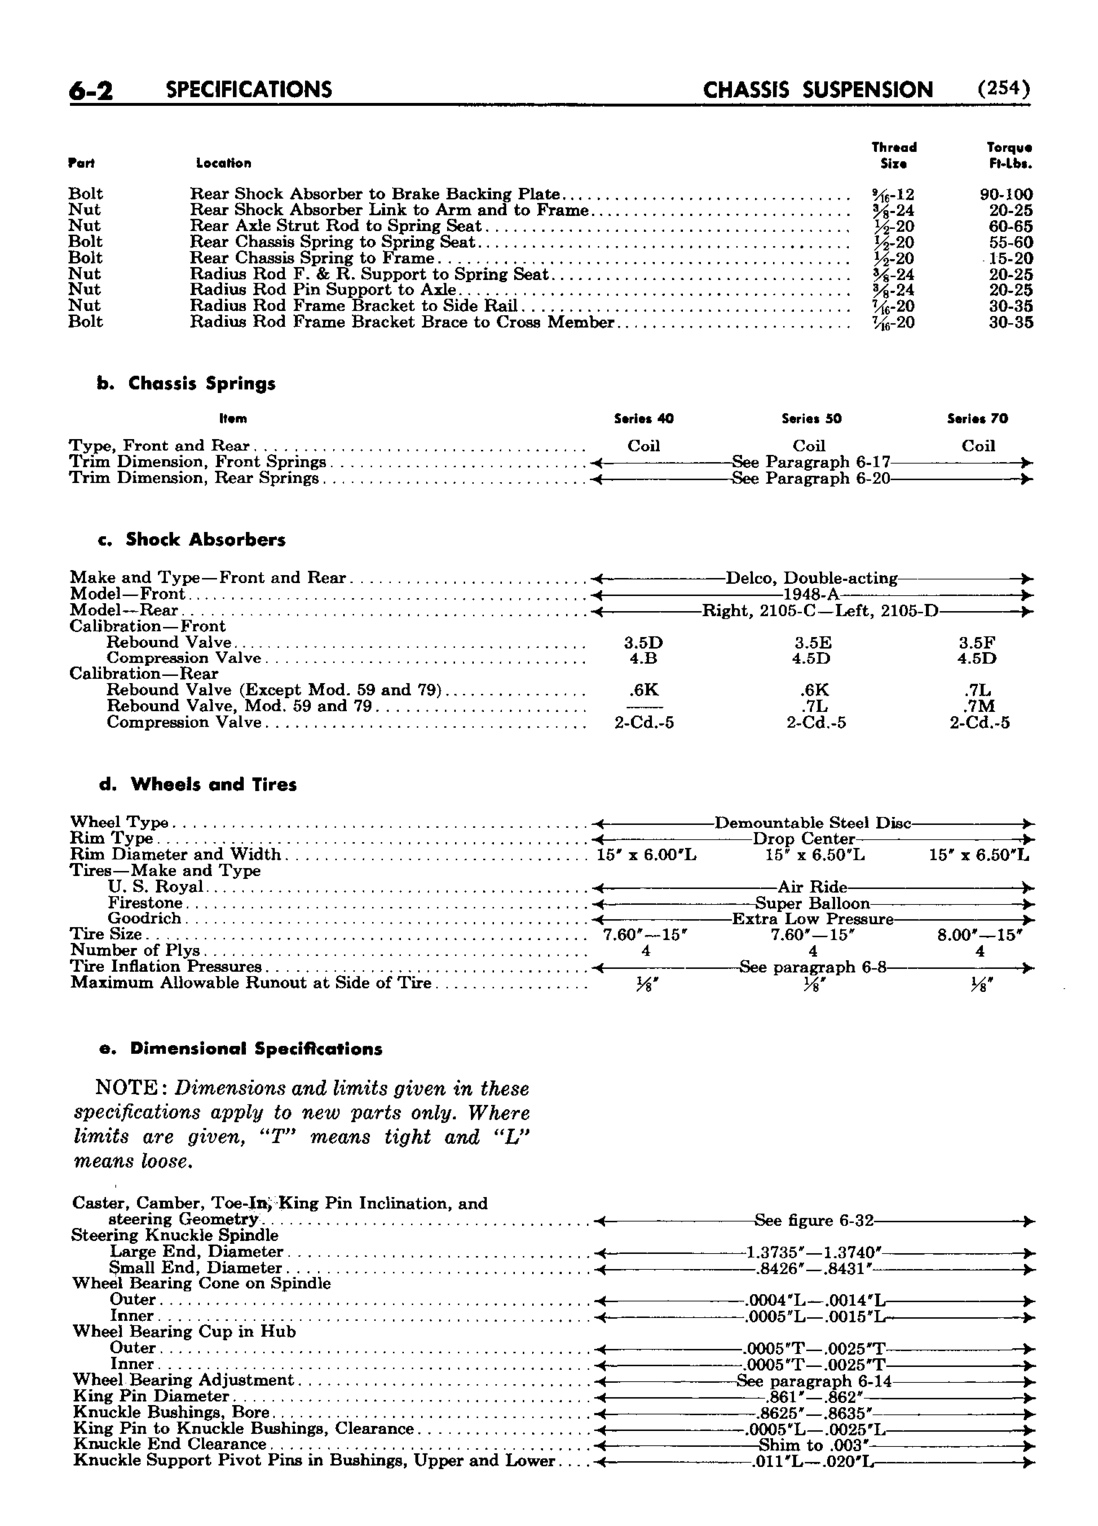 n_07 1952 Buick Shop Manual - Chassis Suspension-002-002.jpg